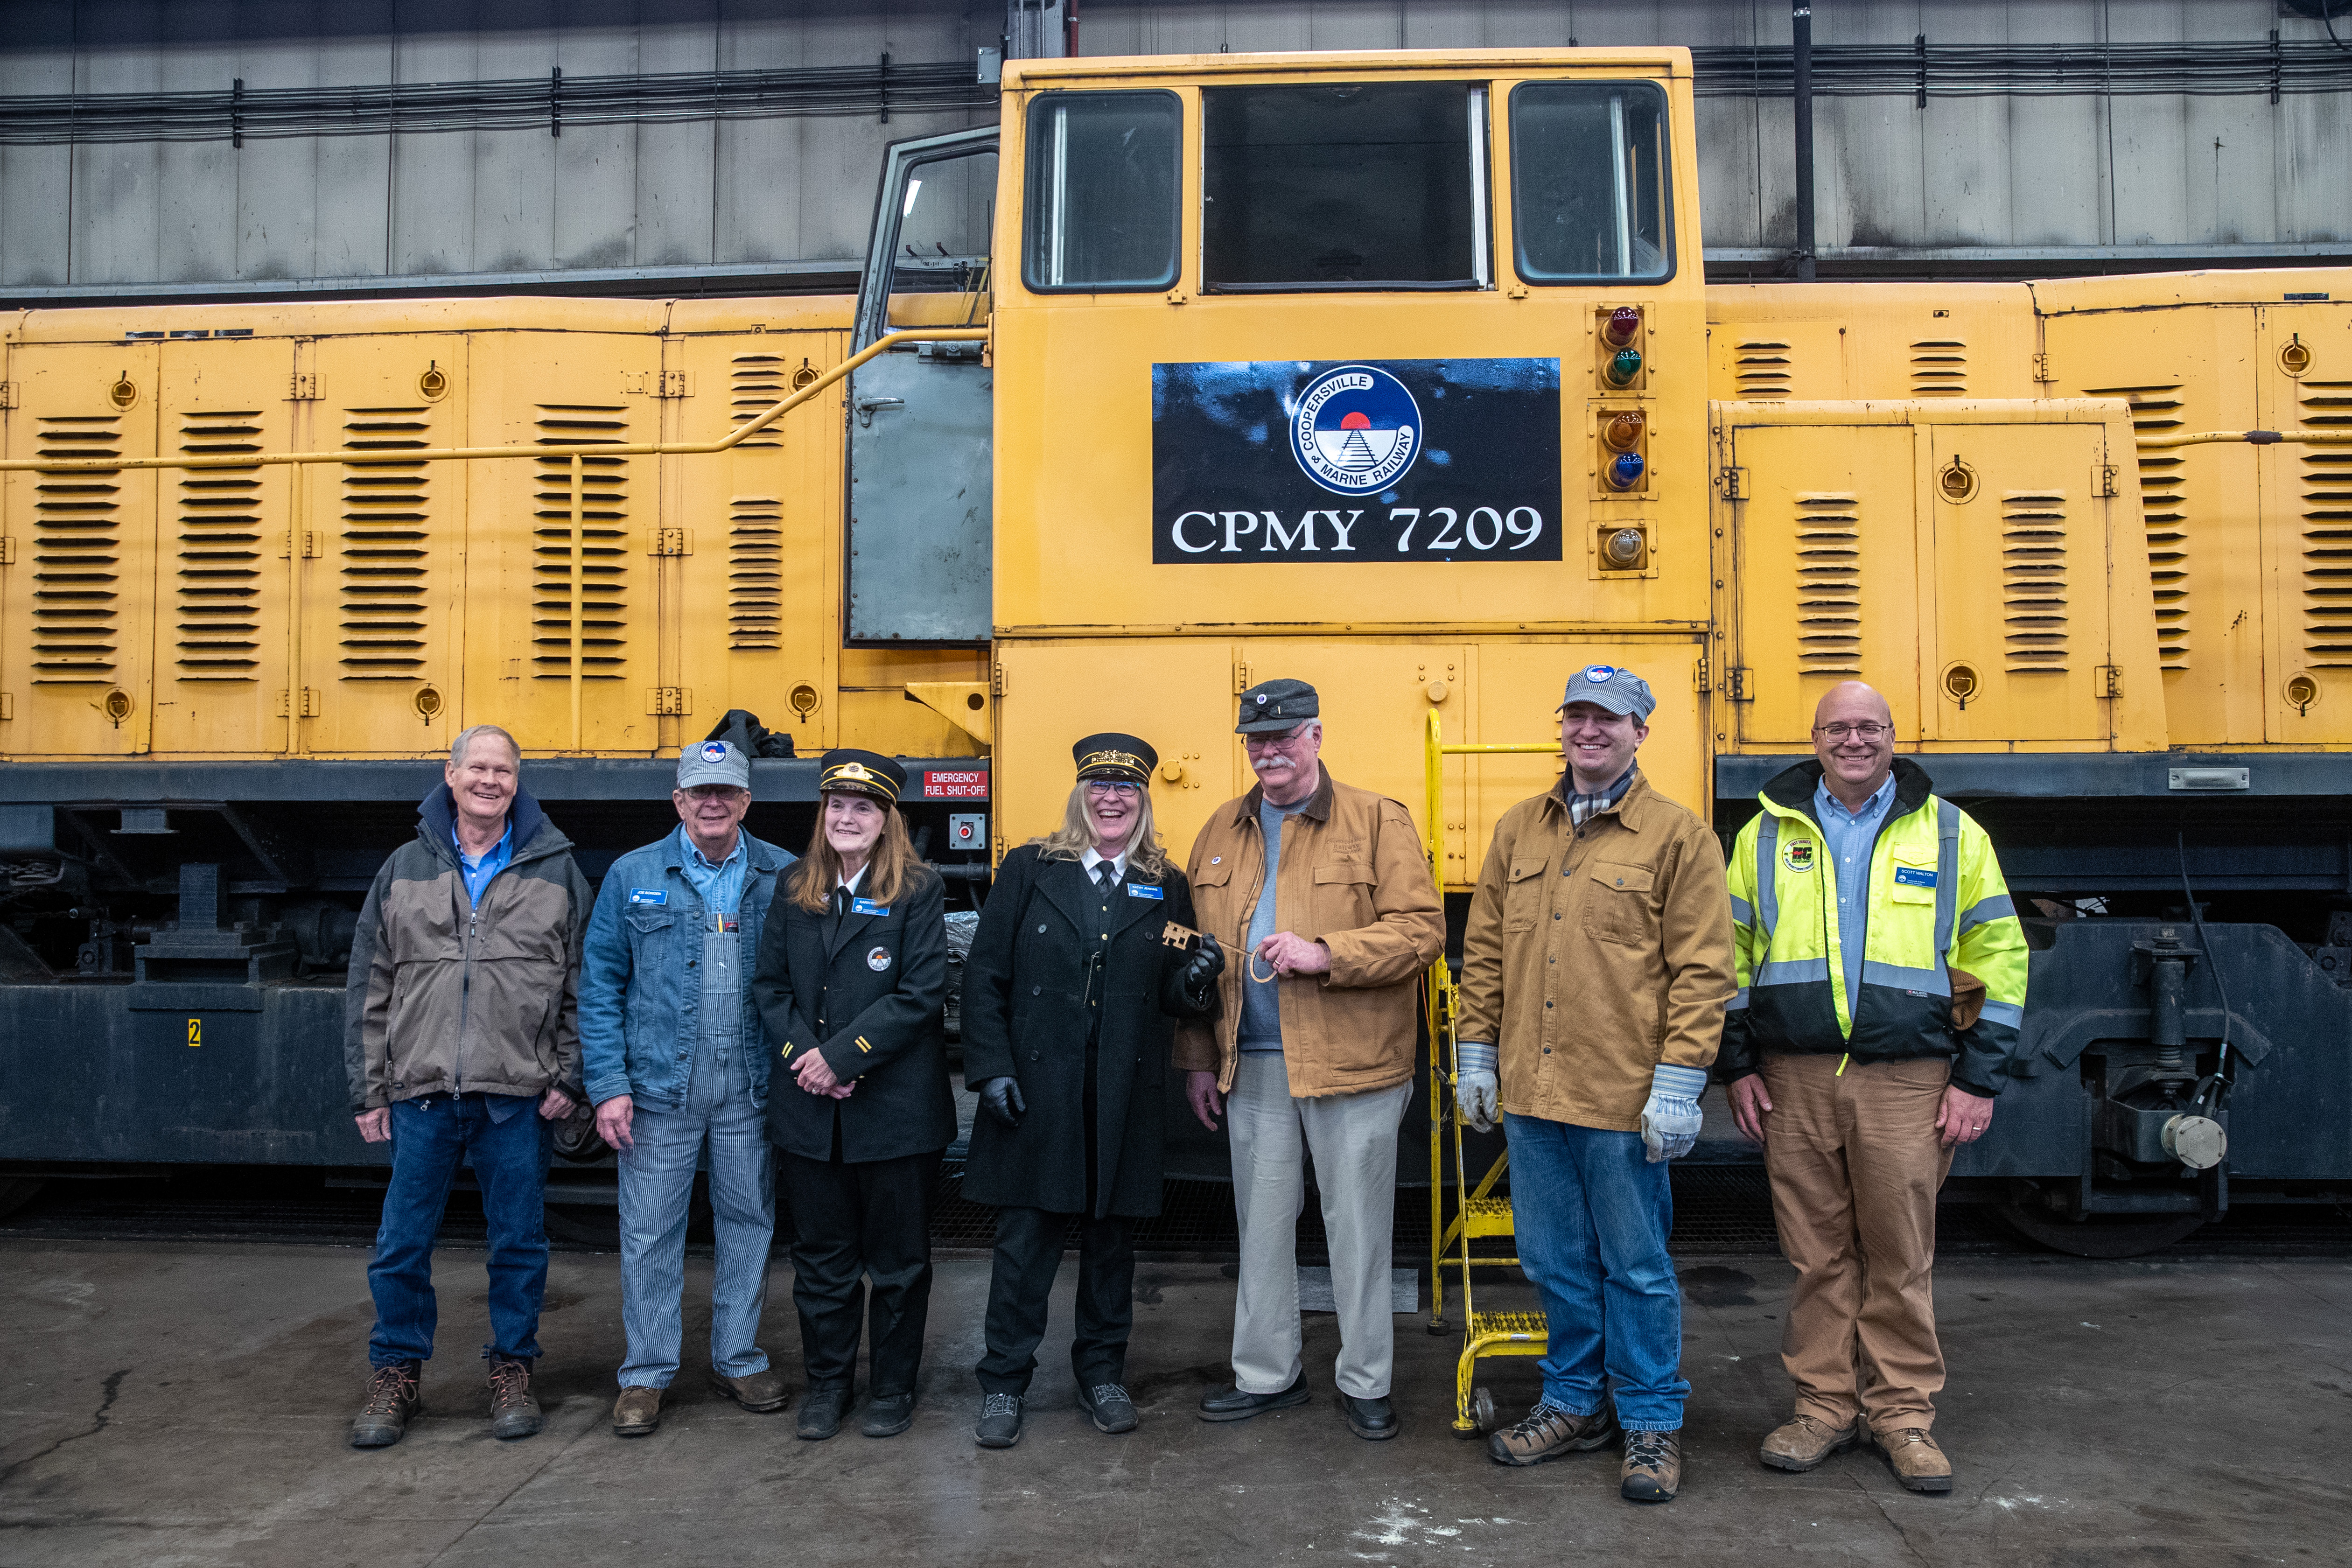 Members of the Coopersville and Marne Railway pose for a picture in front of a 1979 GE diesel train locomotive at the Consumers Energy J.H. Campbell plant in Port Sheldon Township on Monday, Feb. 13, 2023. Consumers Energy is donating the locomotive to the railway. (Cory Morse | MLive.com)